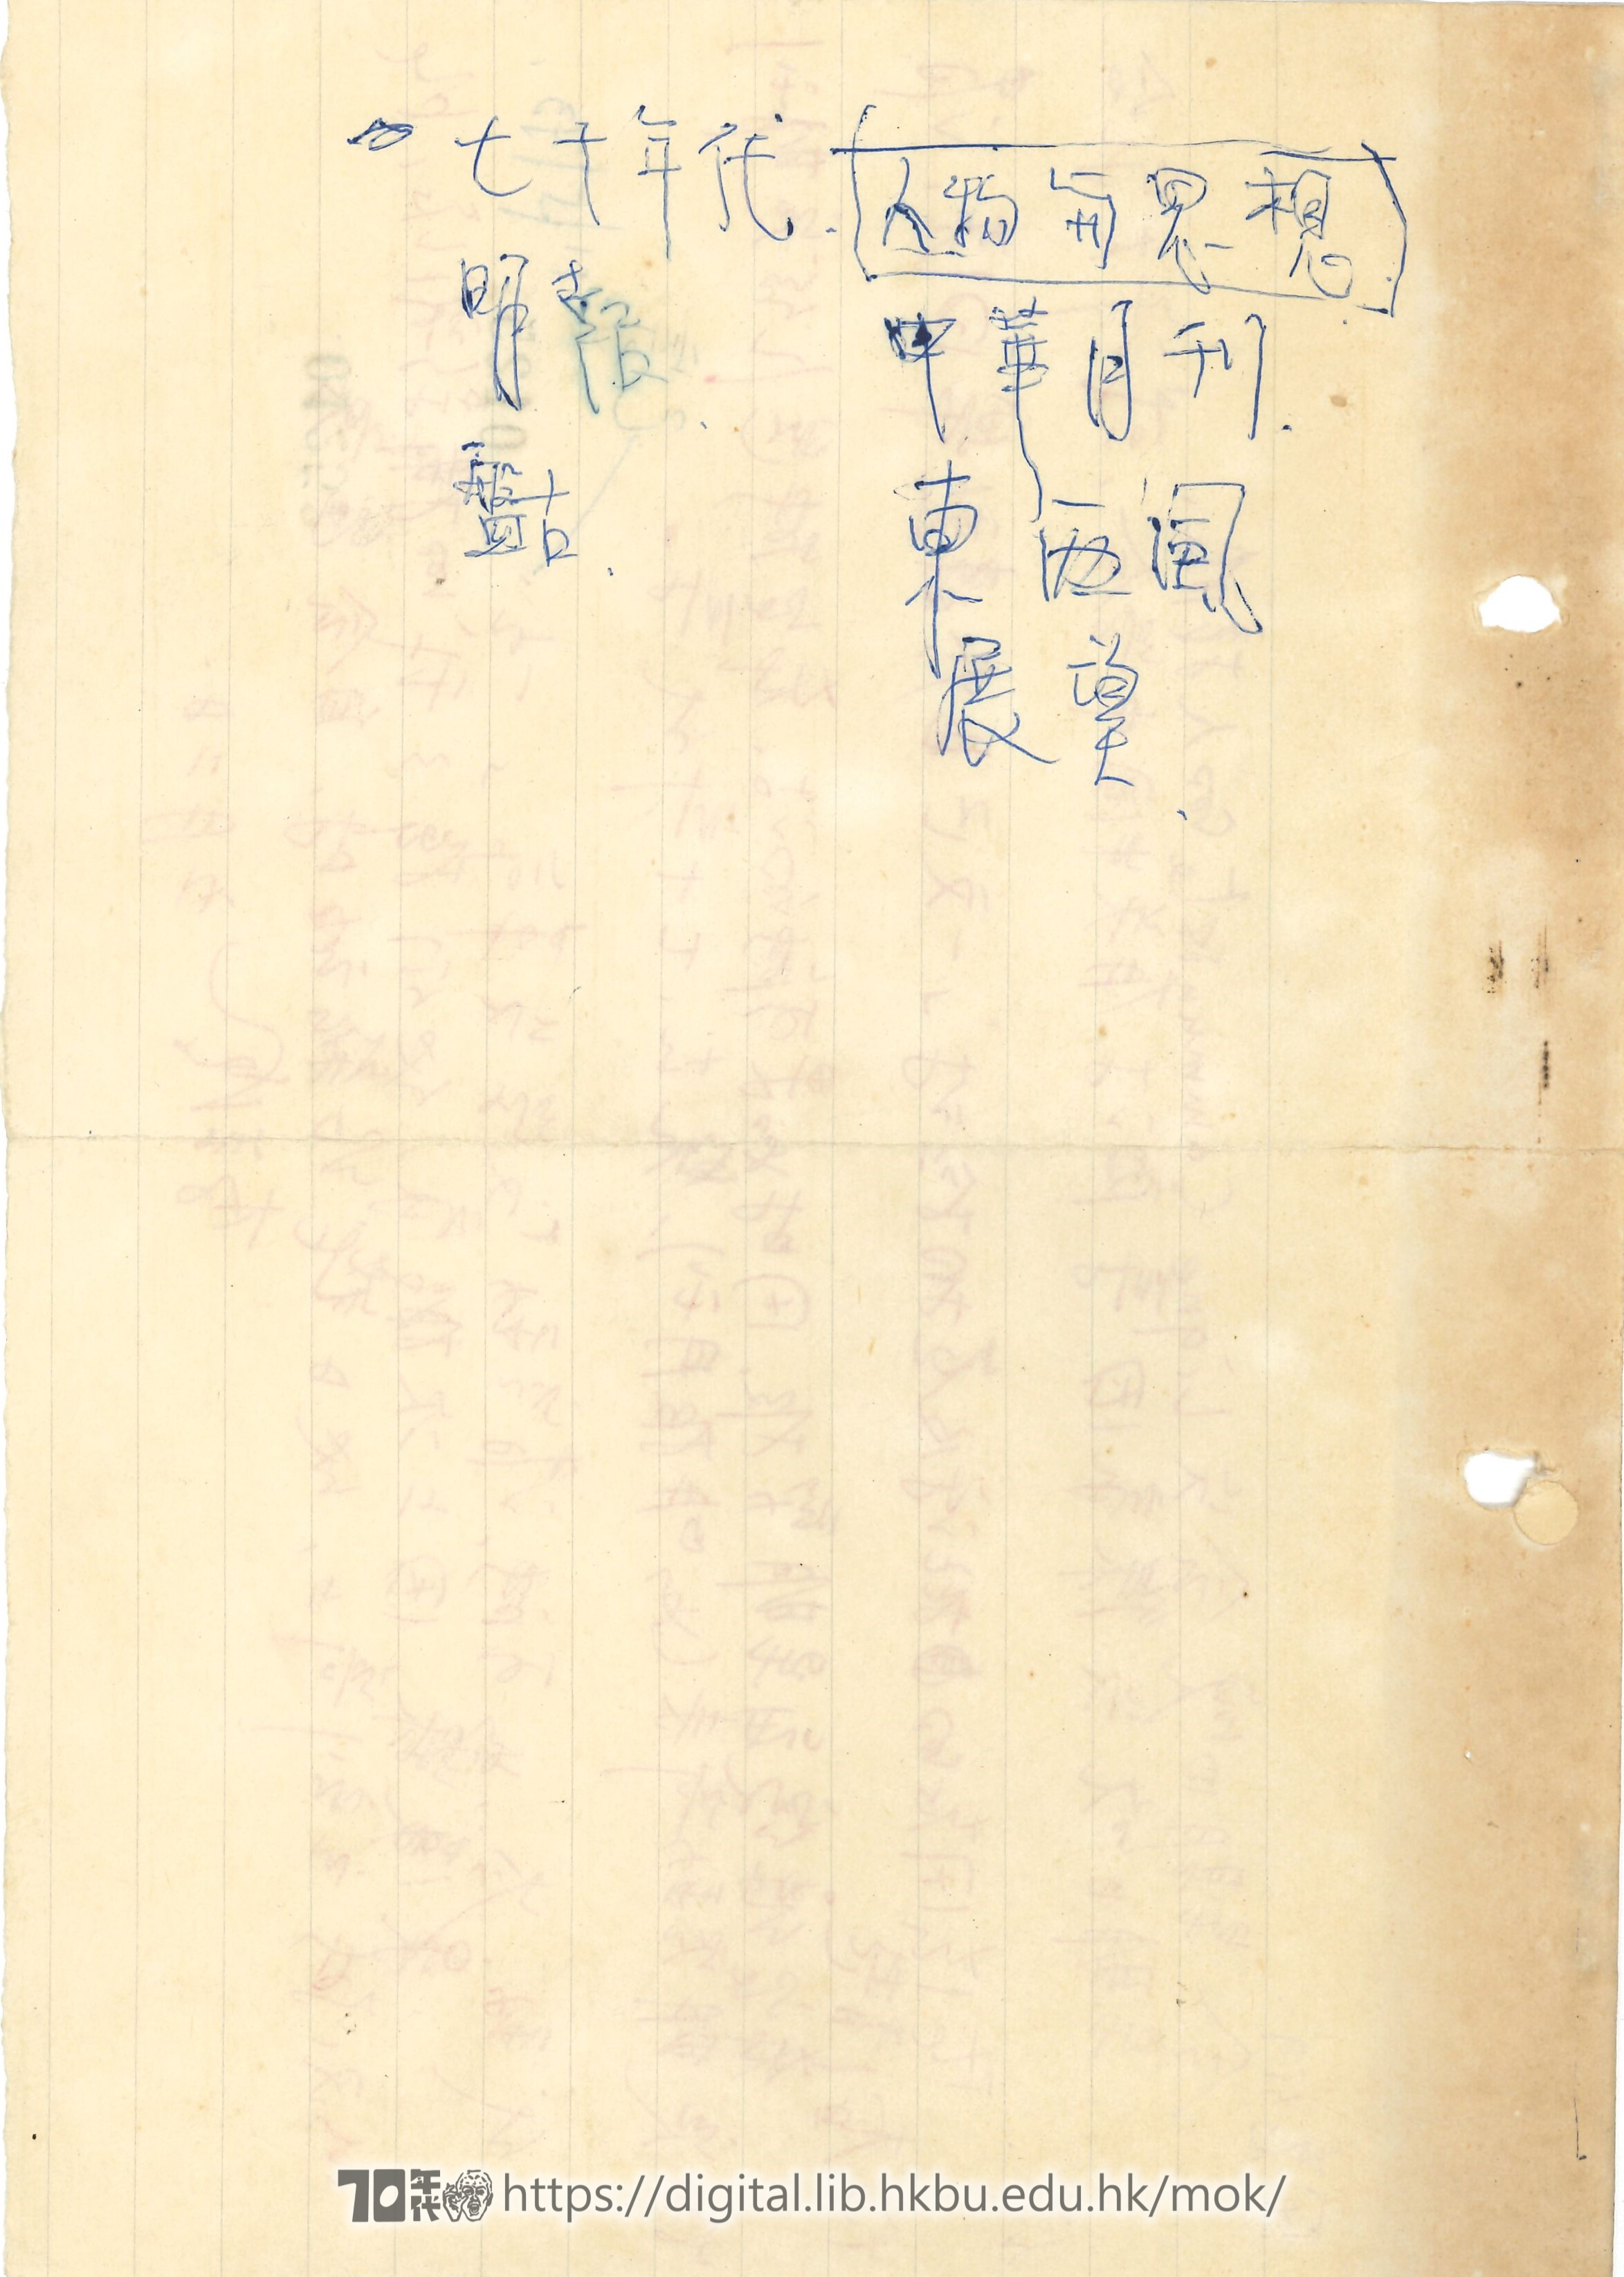   Letter from Lee Kam-fung to friends  